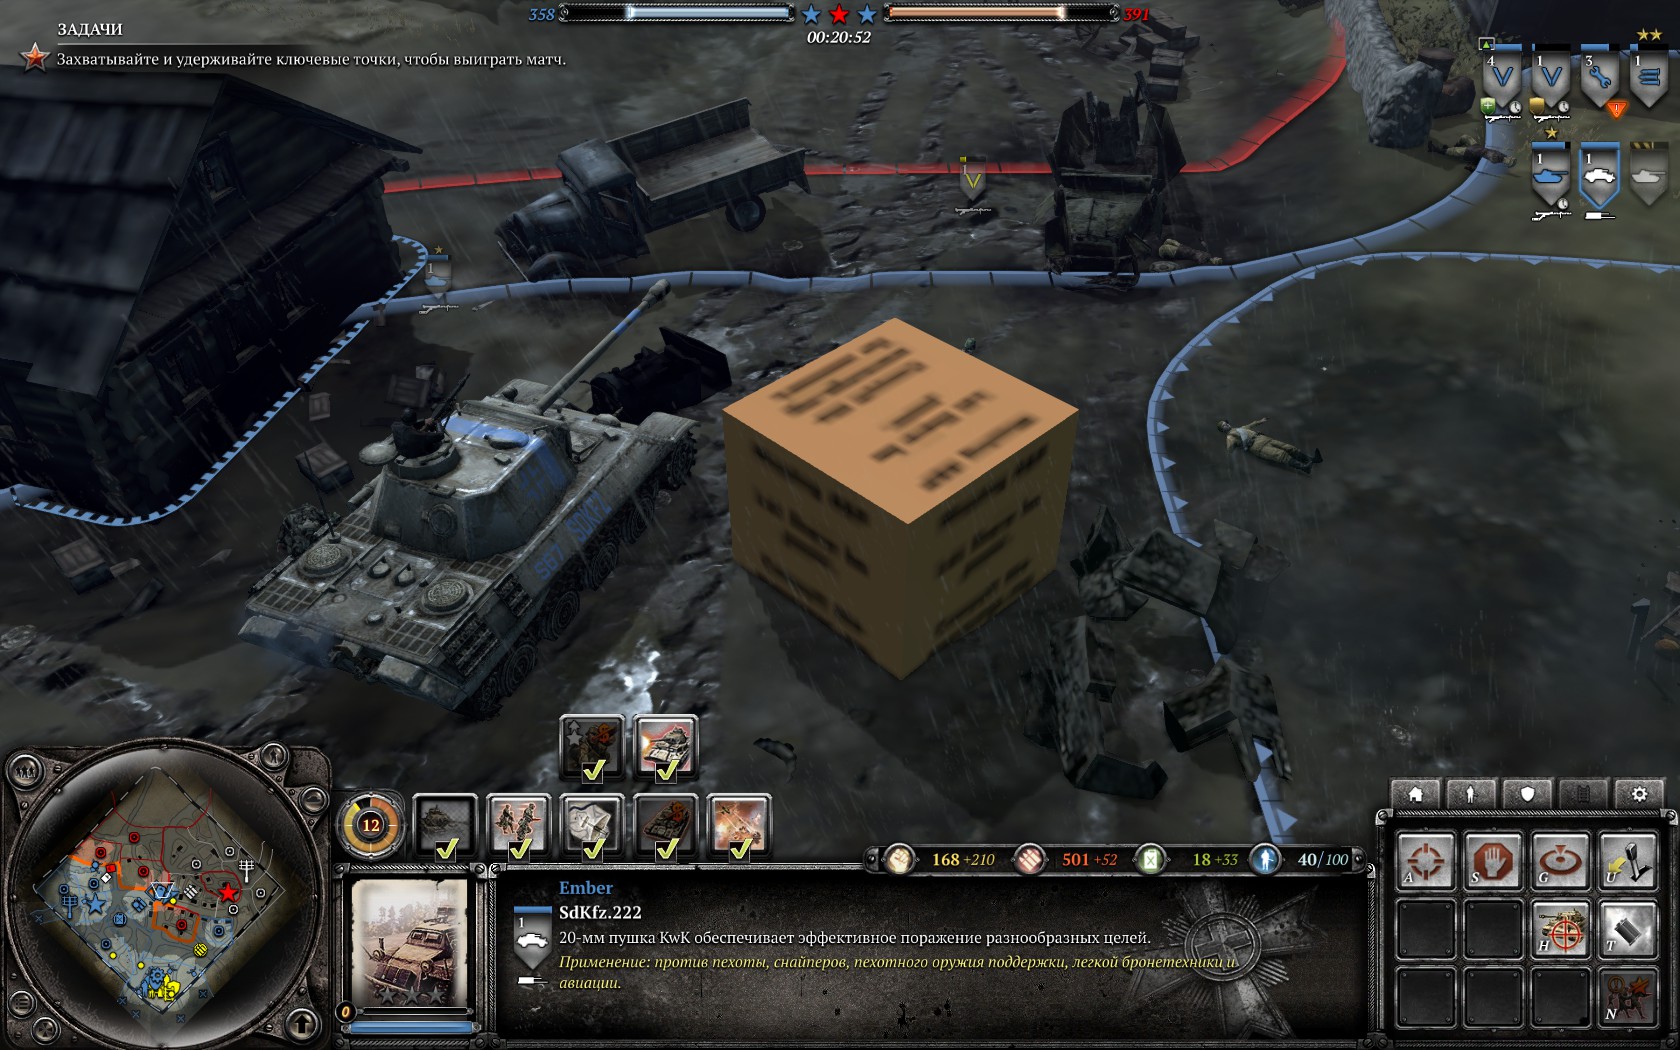 is company of heroes 2 steam controller compatable?